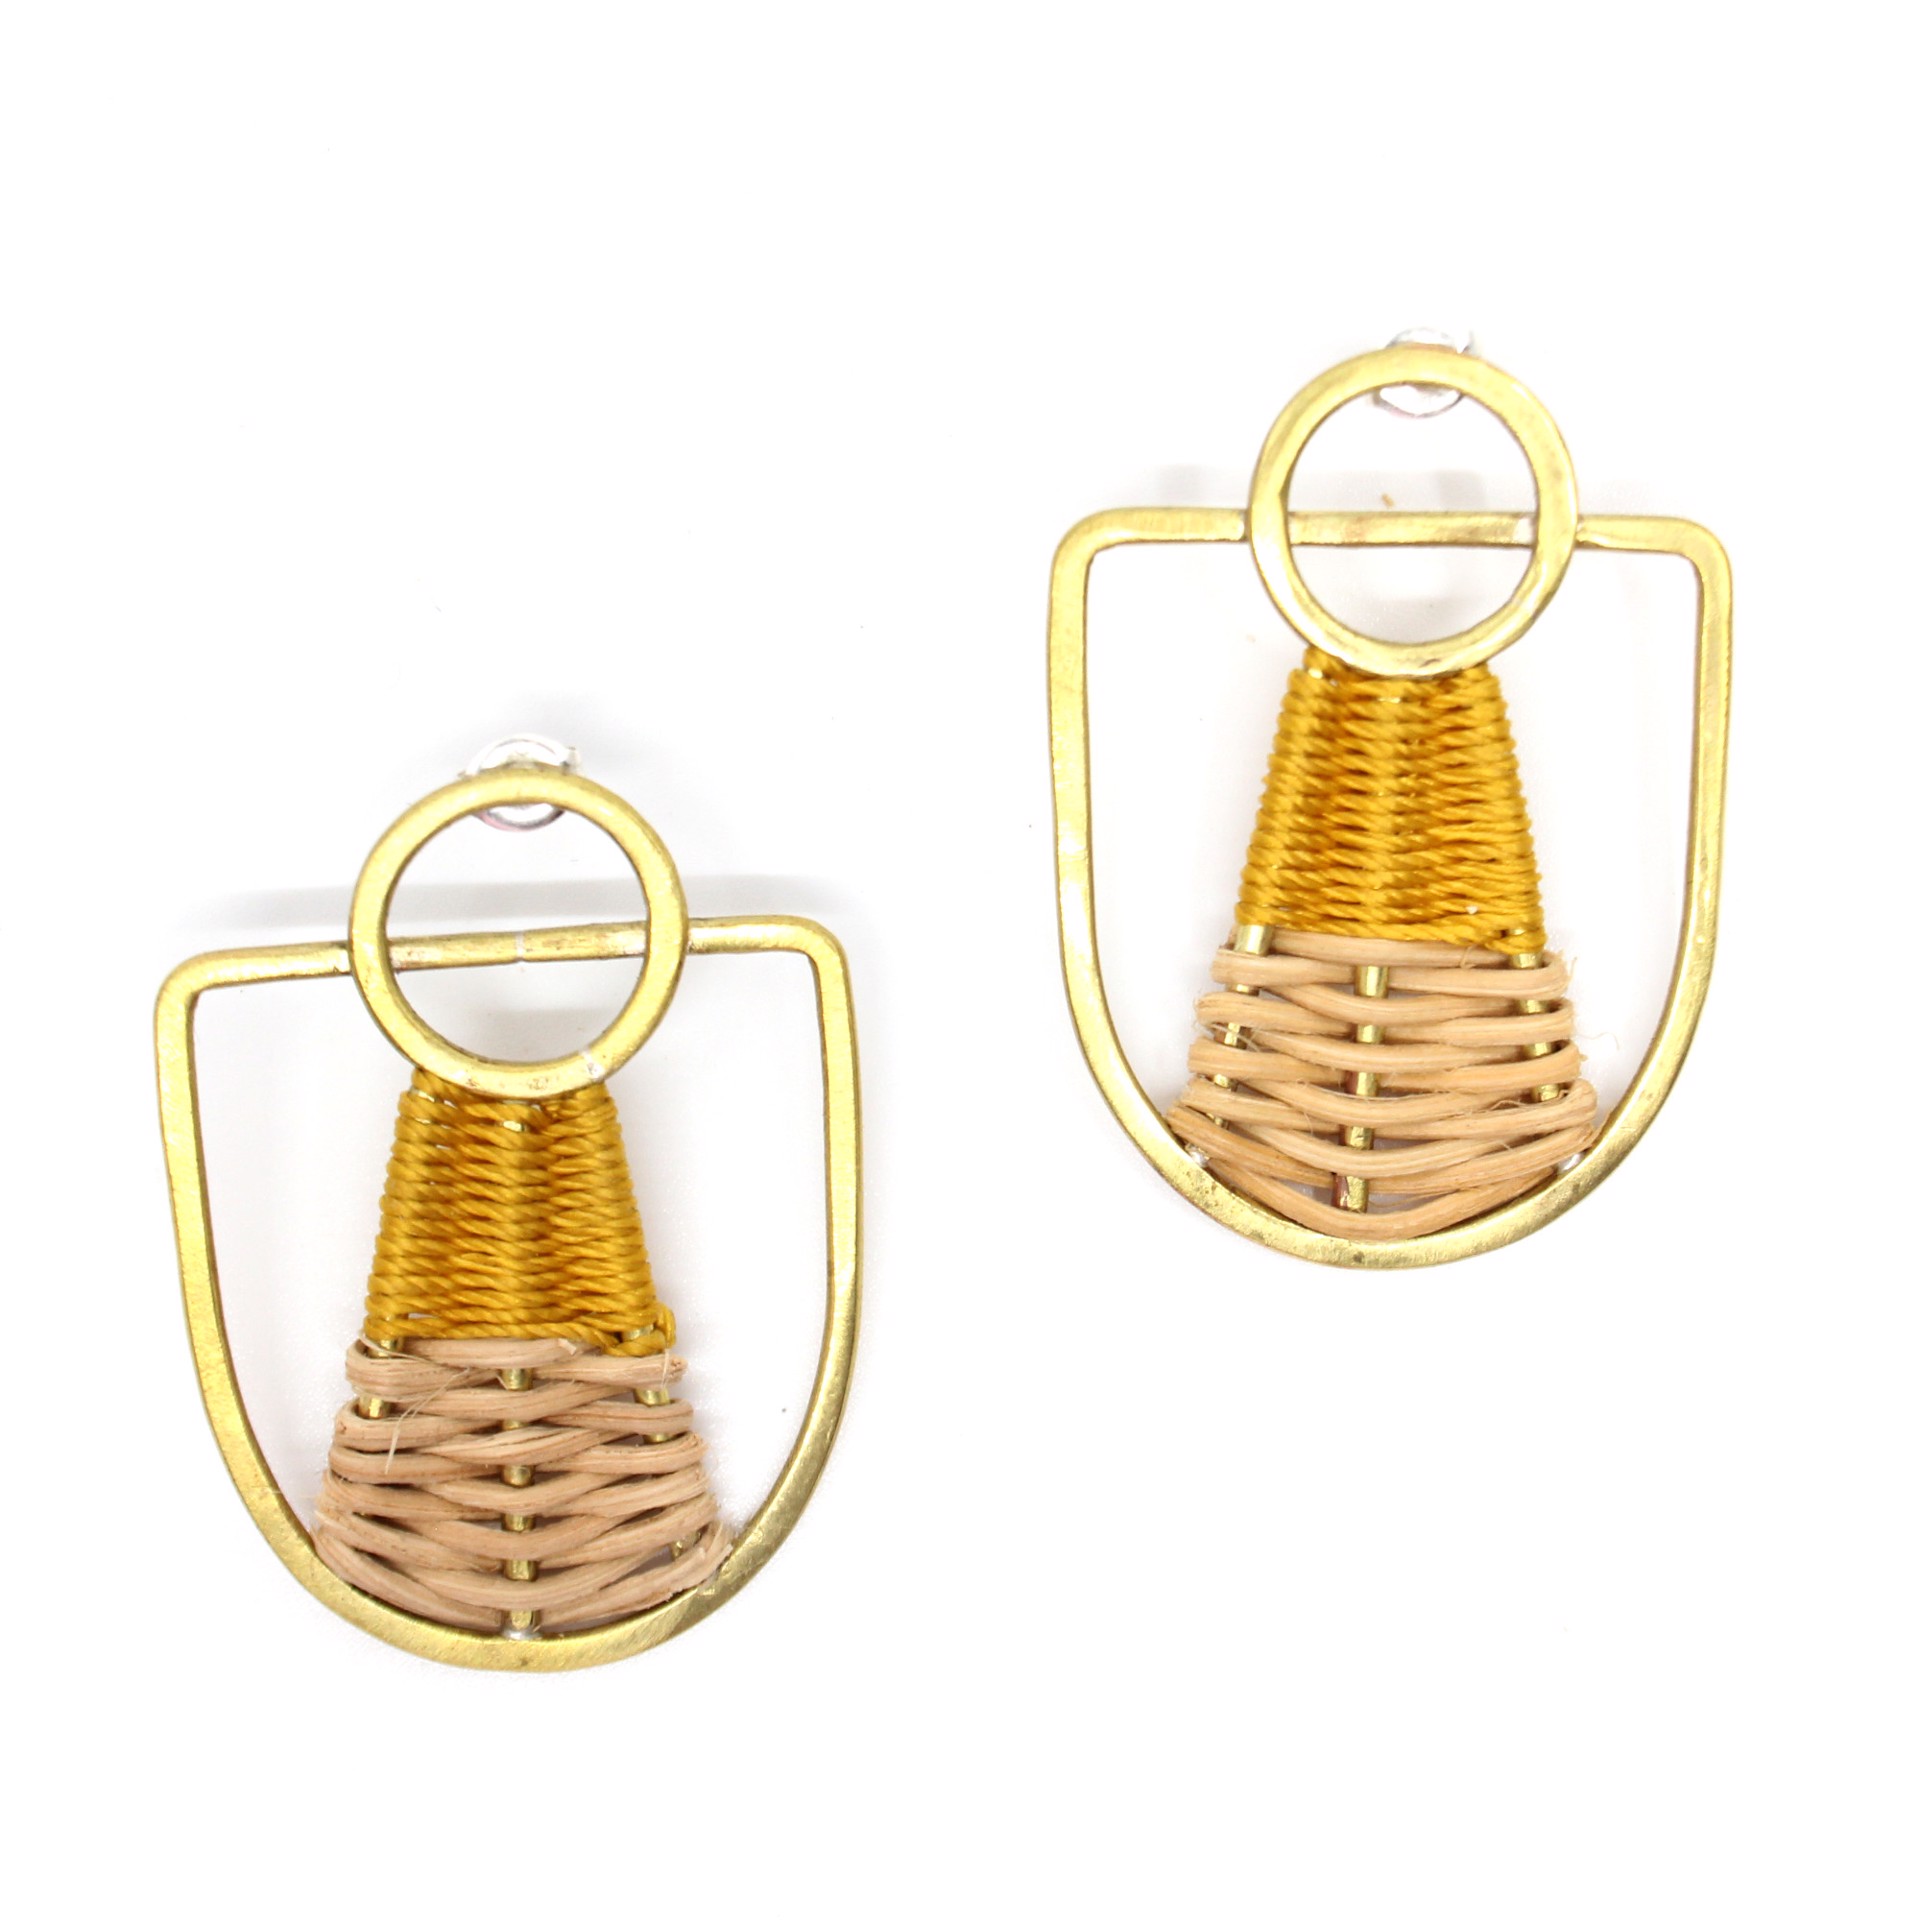 Georgia studs (gold + reed) by Flag Mountain Jewelry